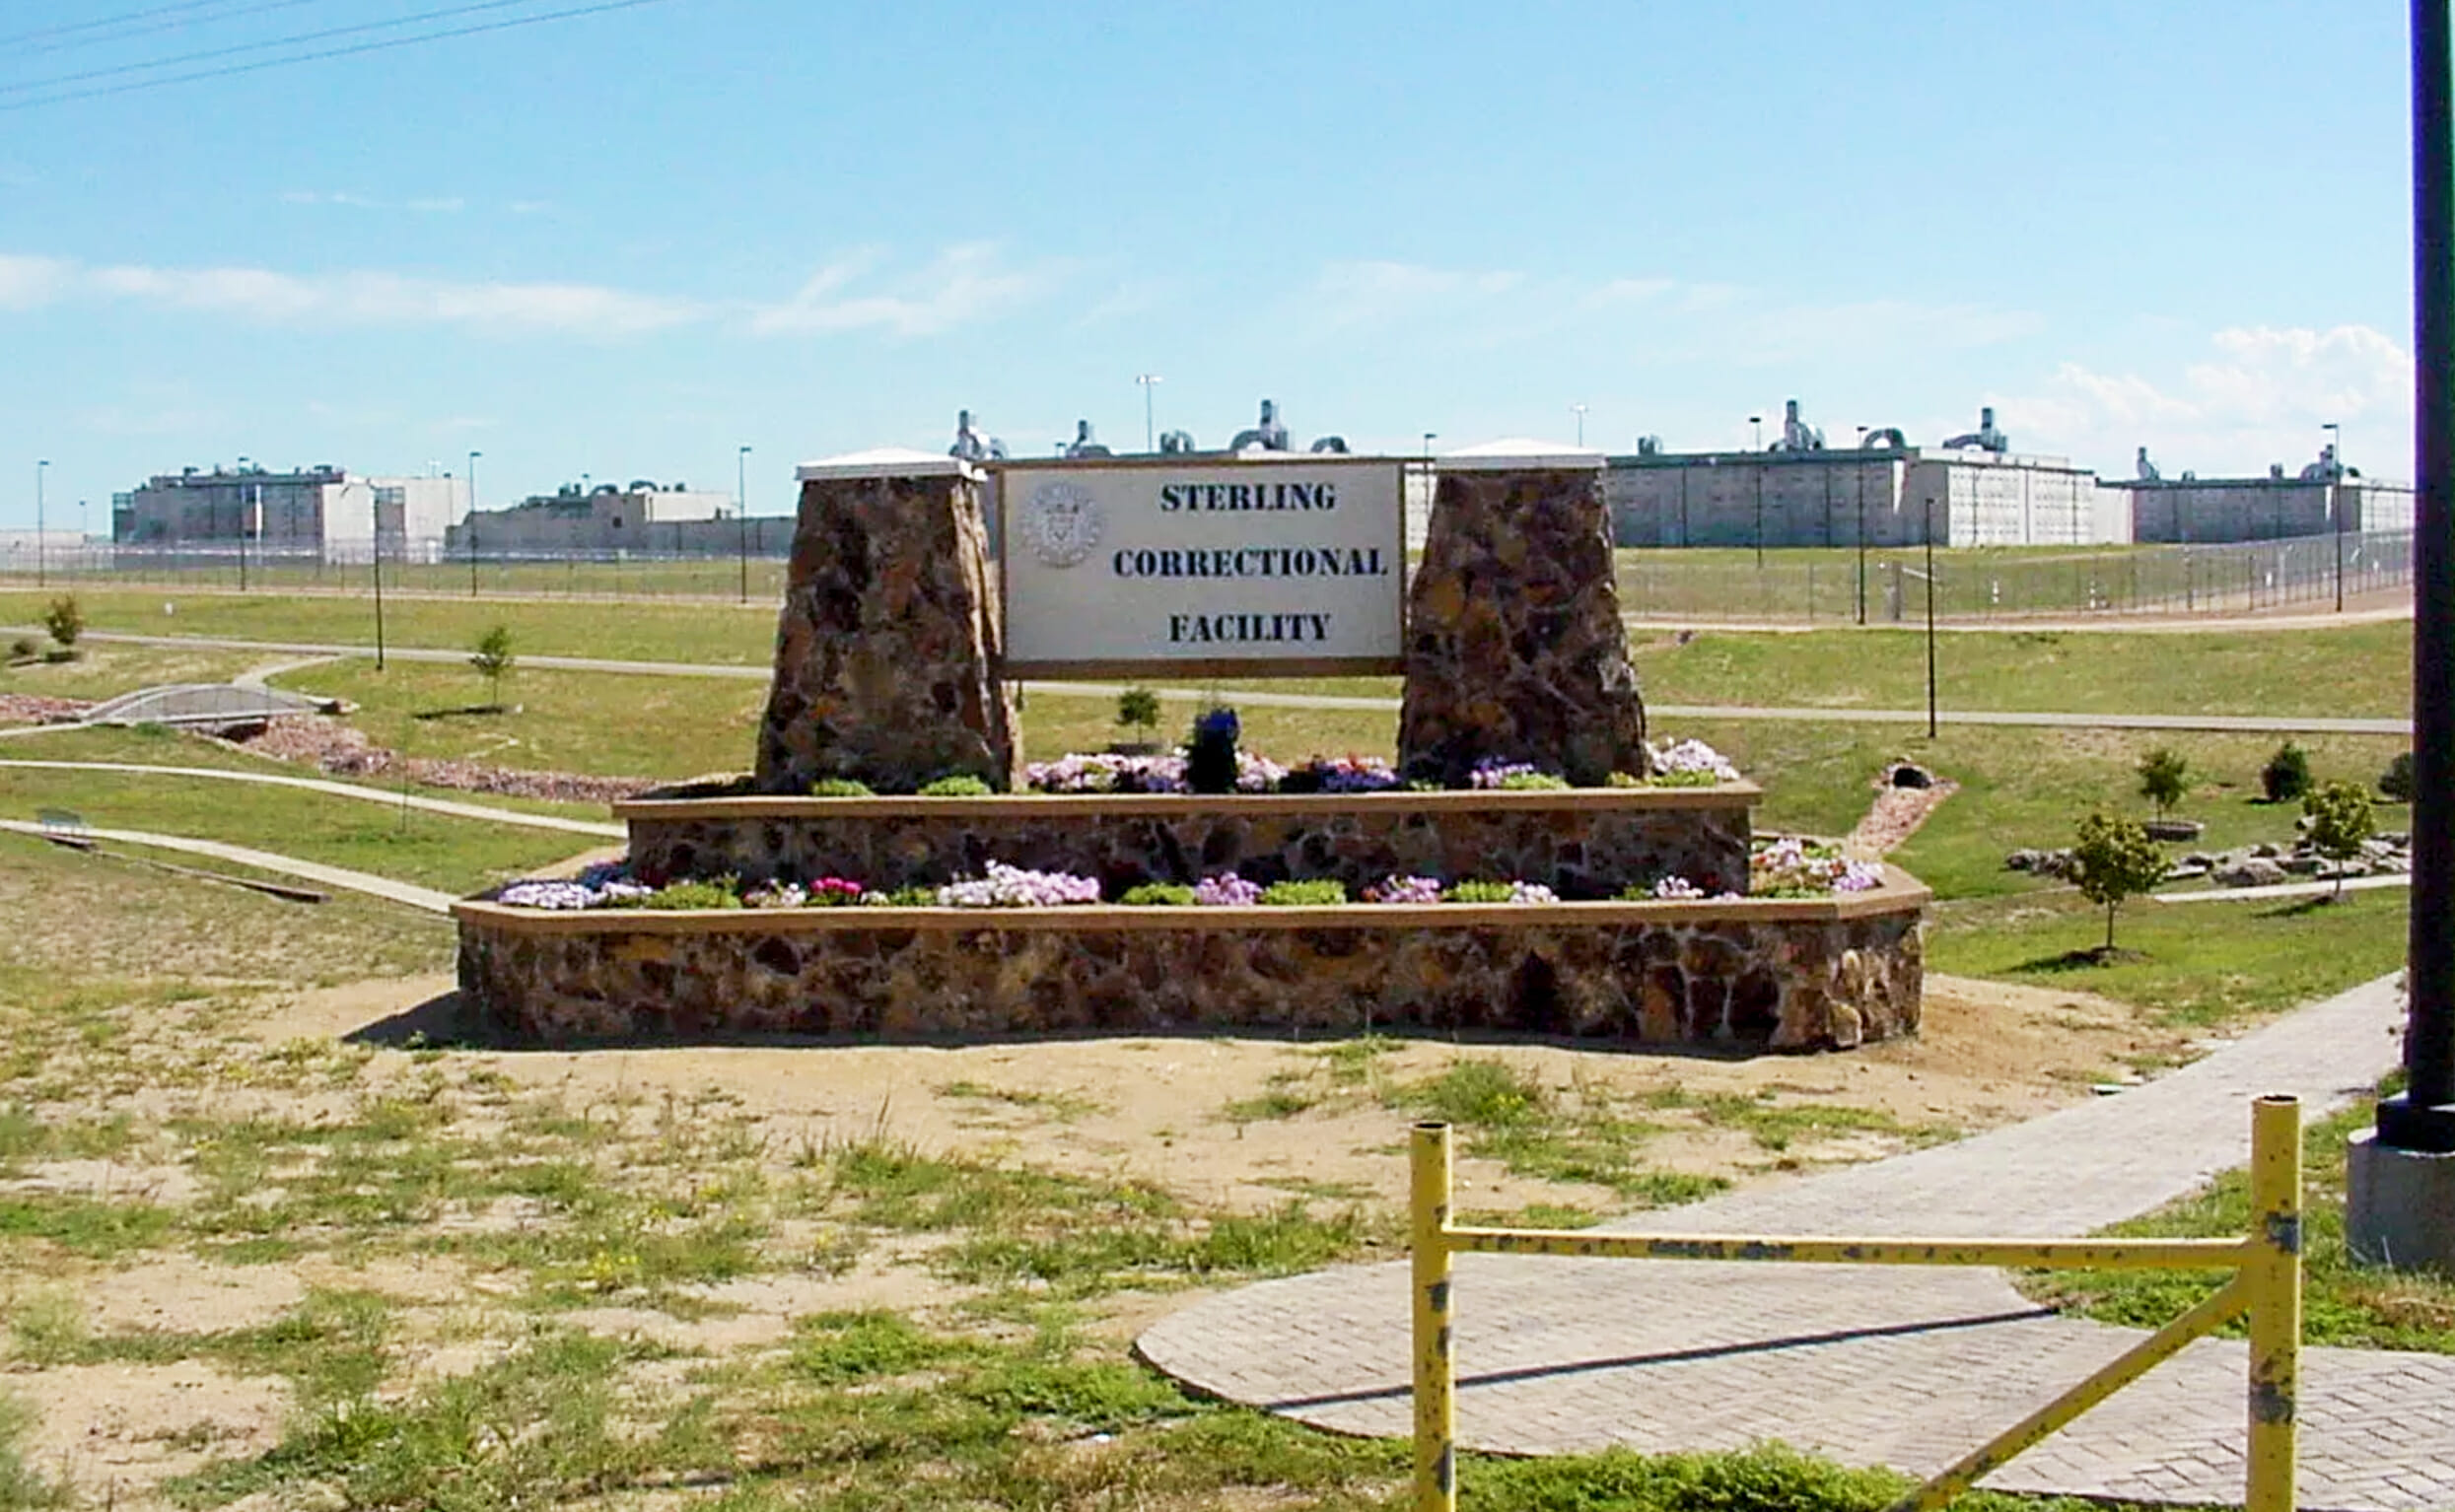 Sterling Correctional Facility